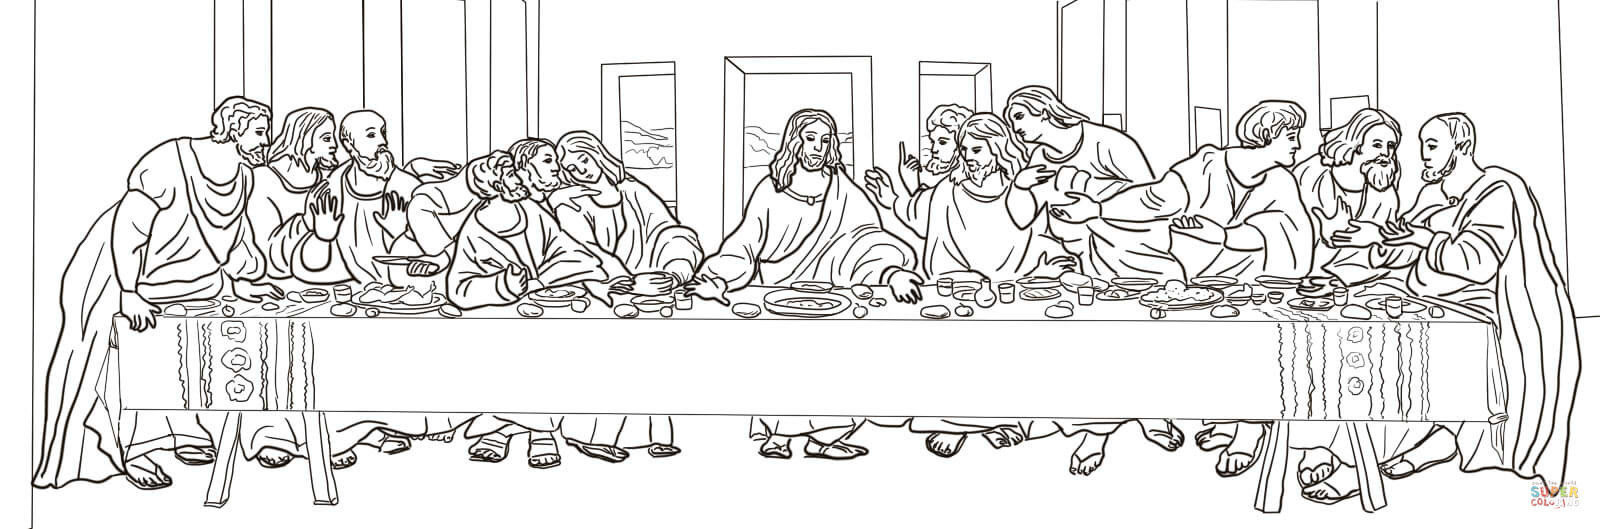 The Last Supper Coloring Pages Printable
 The Last Supper by Leonardo da Vinci coloring page